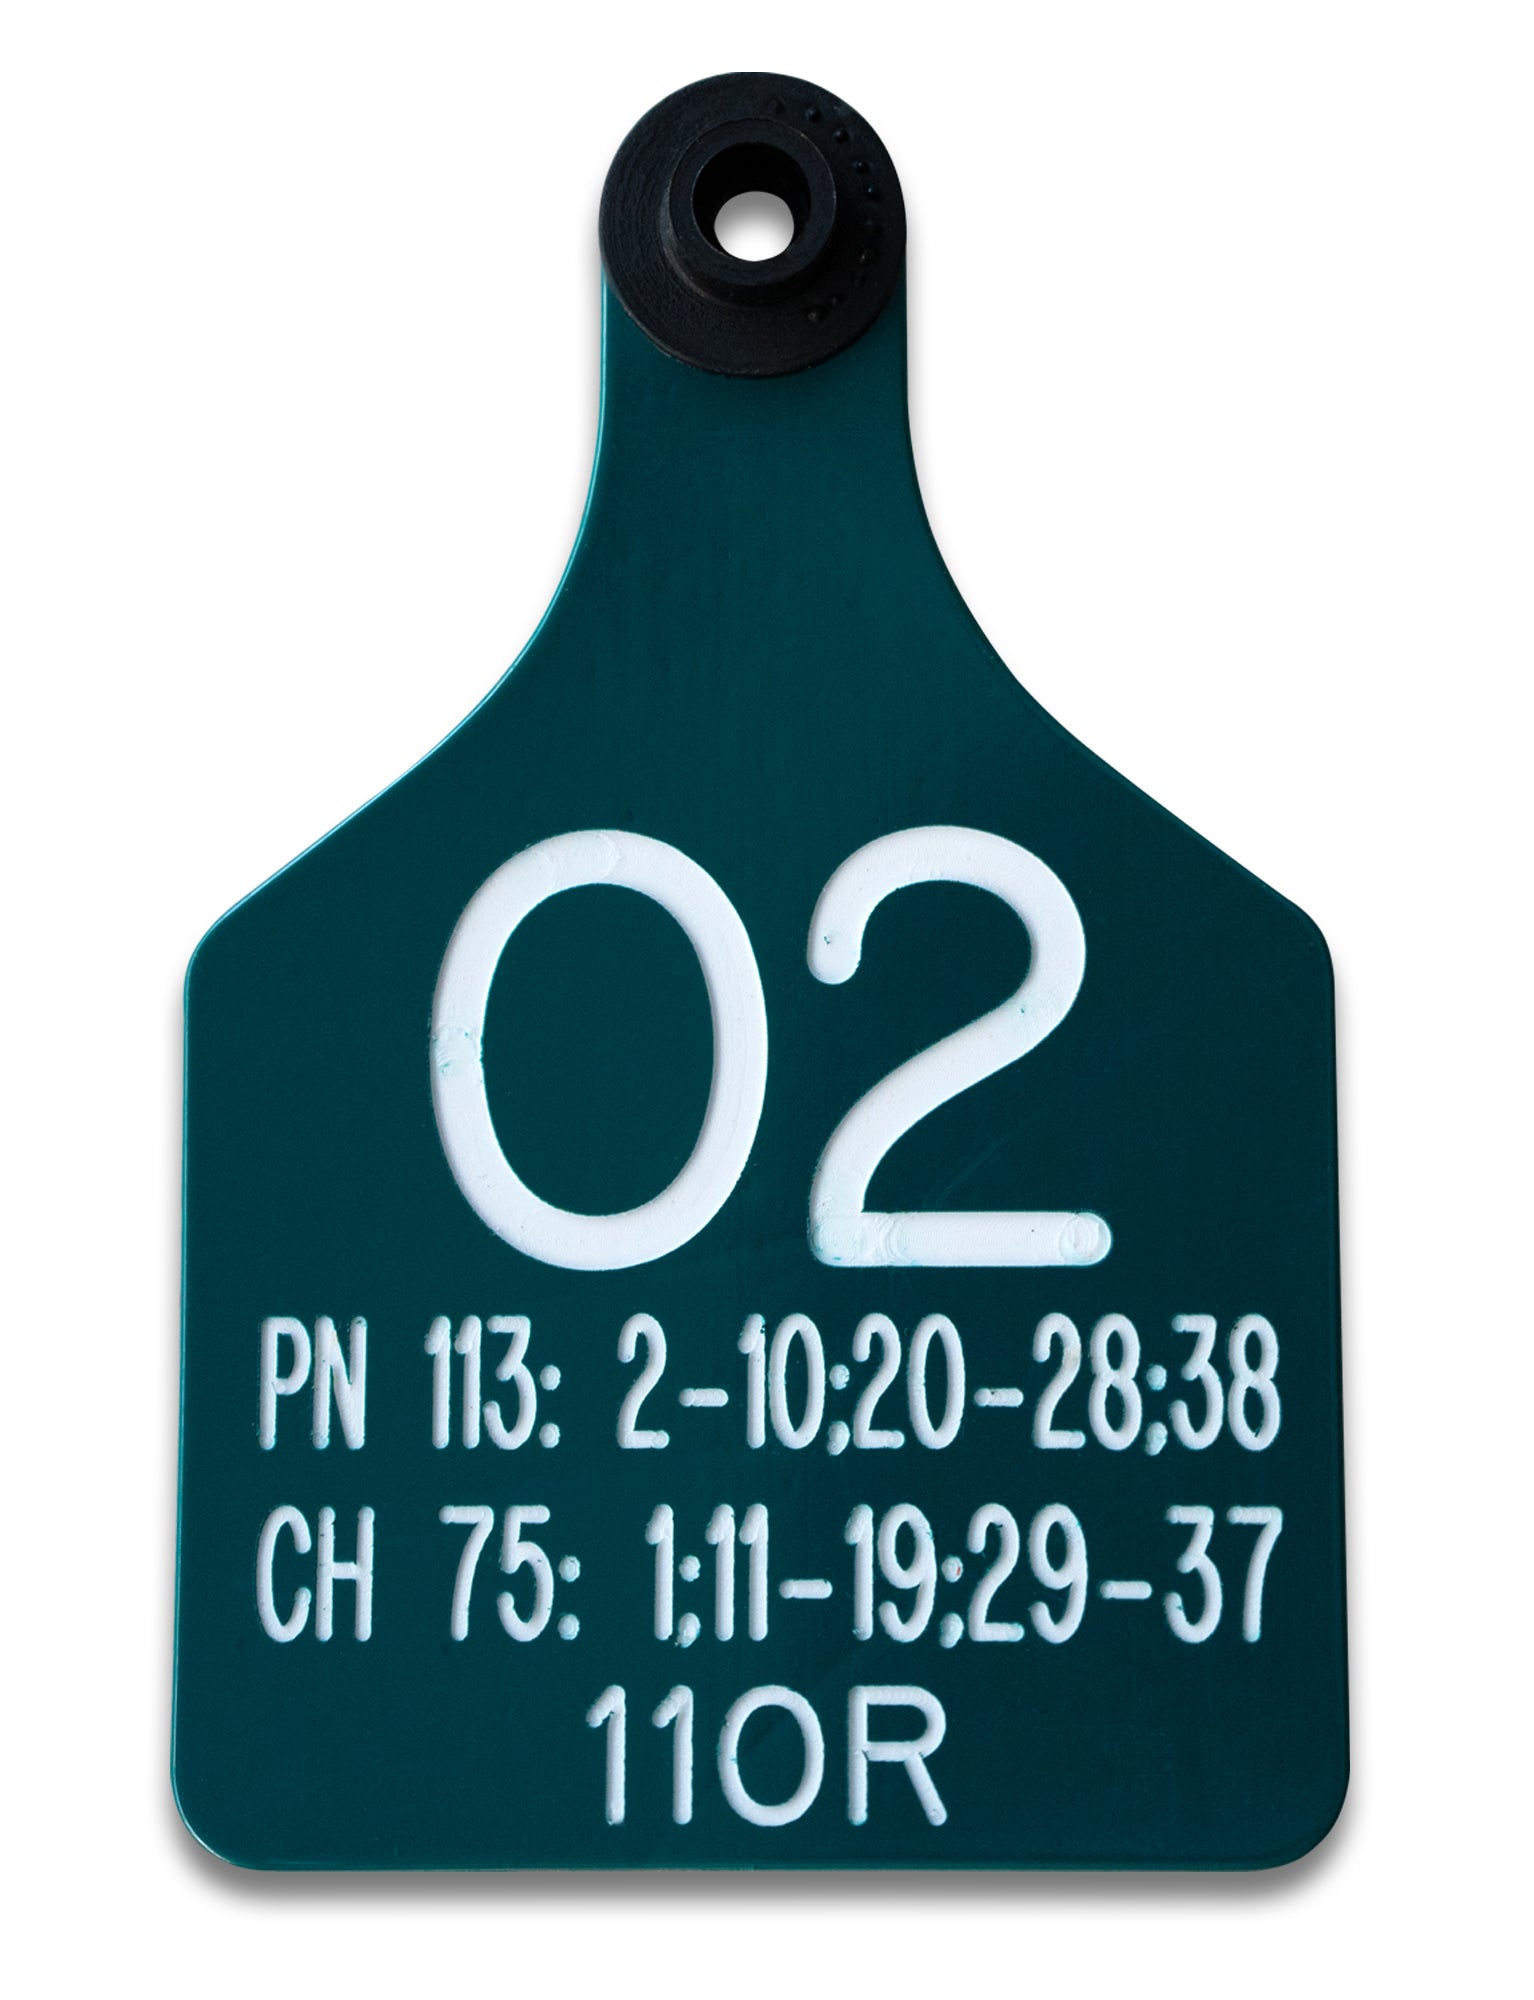 Vineyard Tag that is green and white in color.